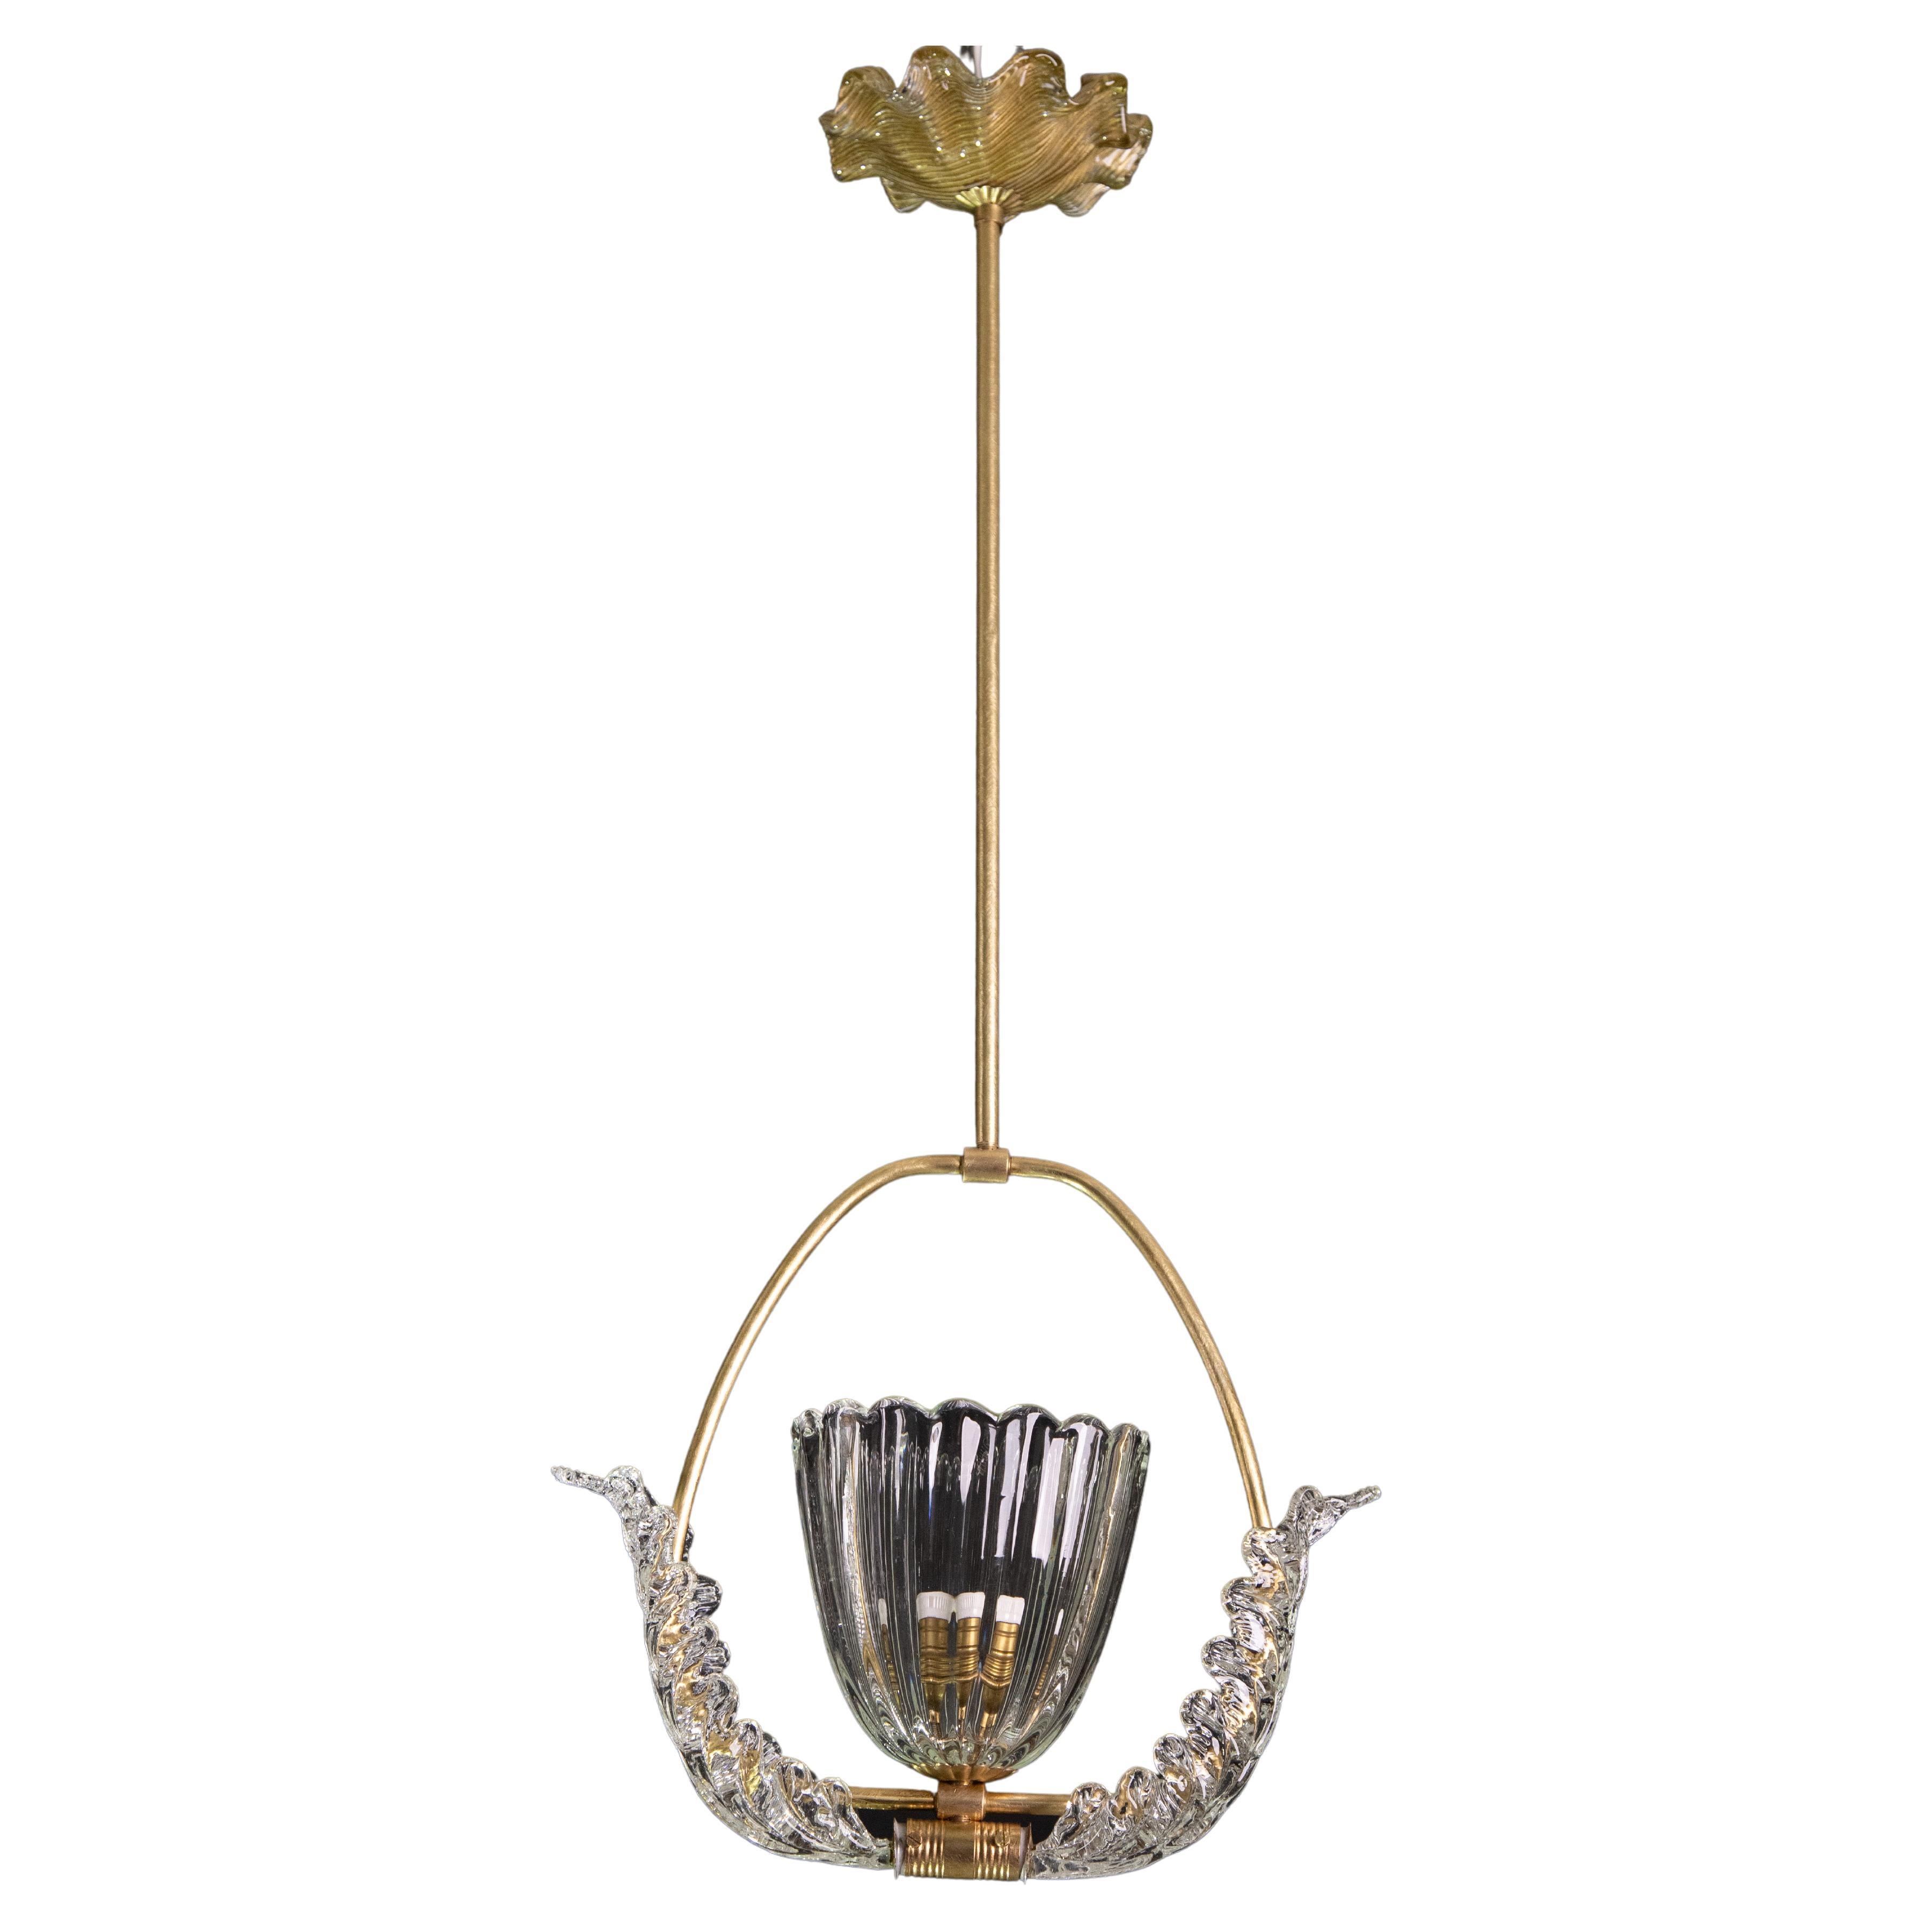 Splendid Art Deco style pendant made by the Barovier & Toso glassworks in the 1940s-1950s. The chandelier is 70cm high with the rod, 35cm wide. Mount an E27 light. The chandelier is made up of 3 glass elements. 